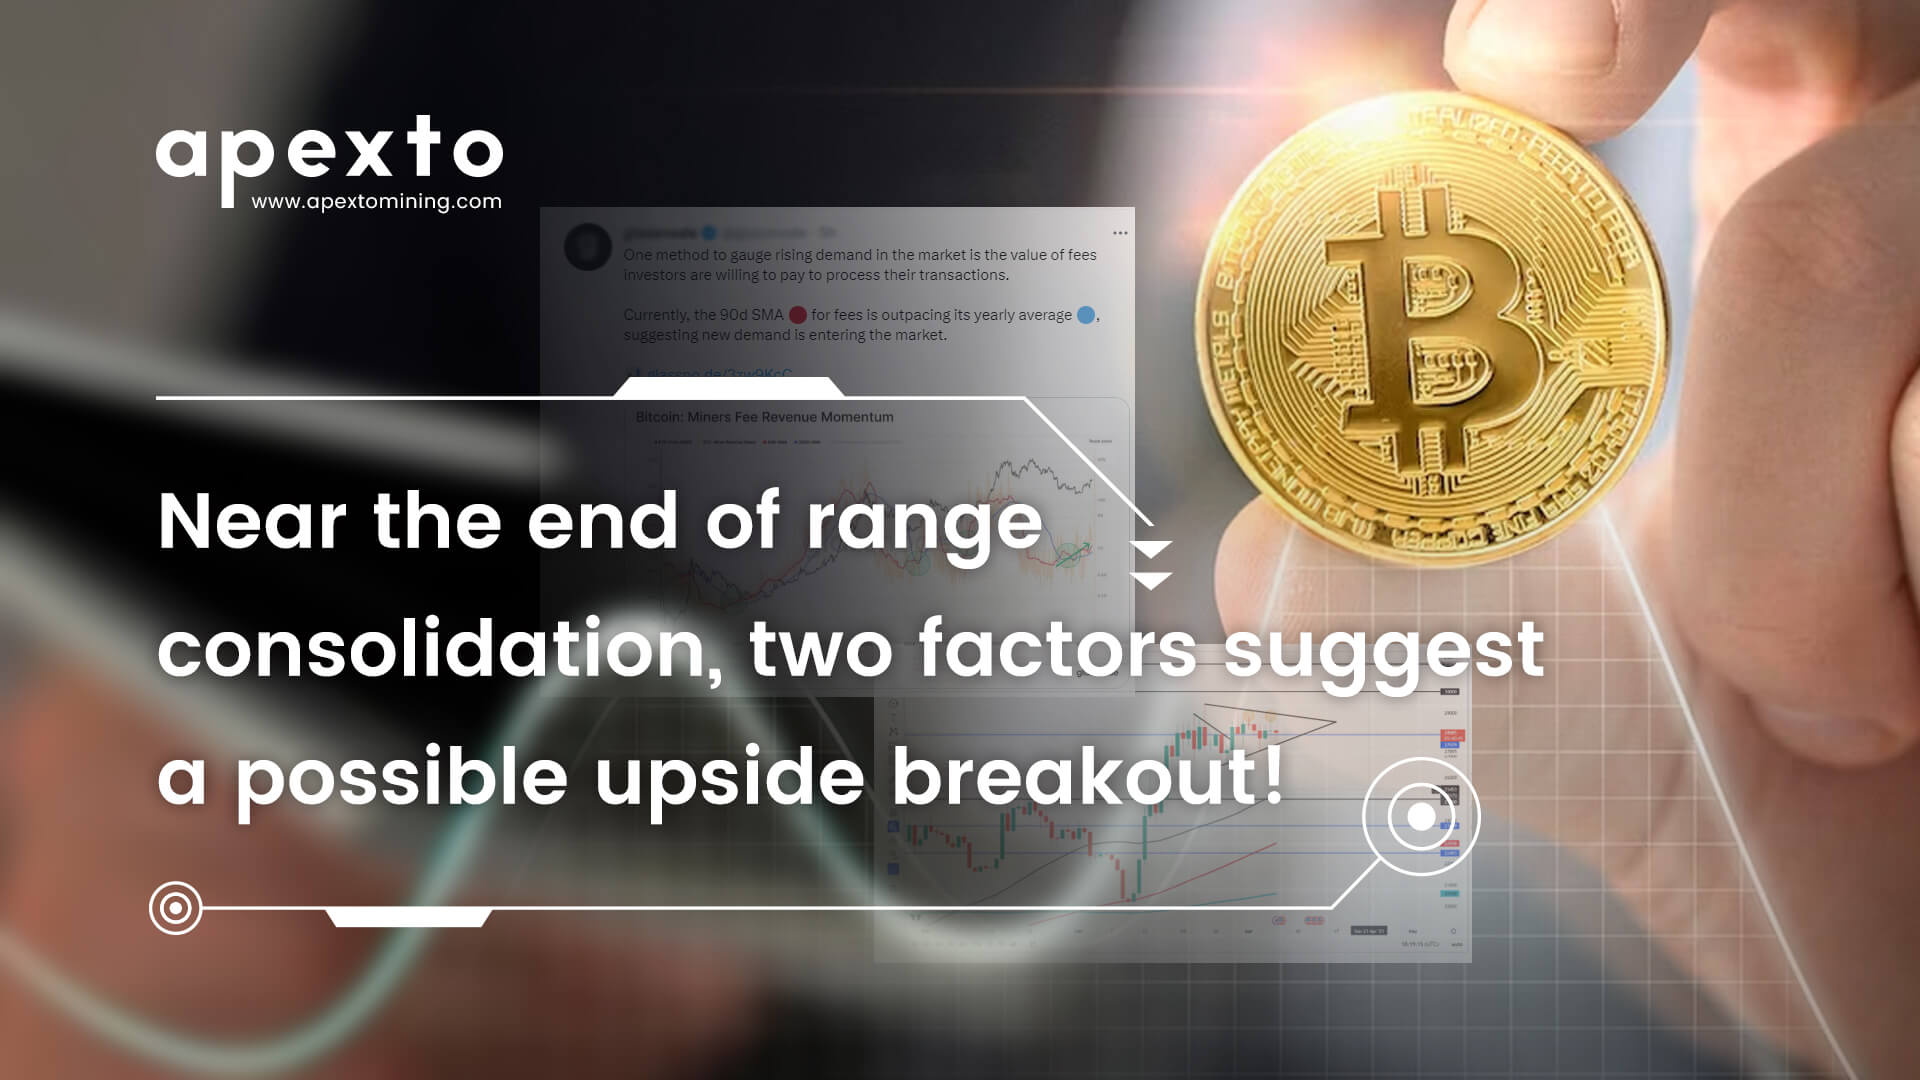 Bitcoin (BTC) News : Near the end of range consolidation, two factors suggest a possible upside breakout!